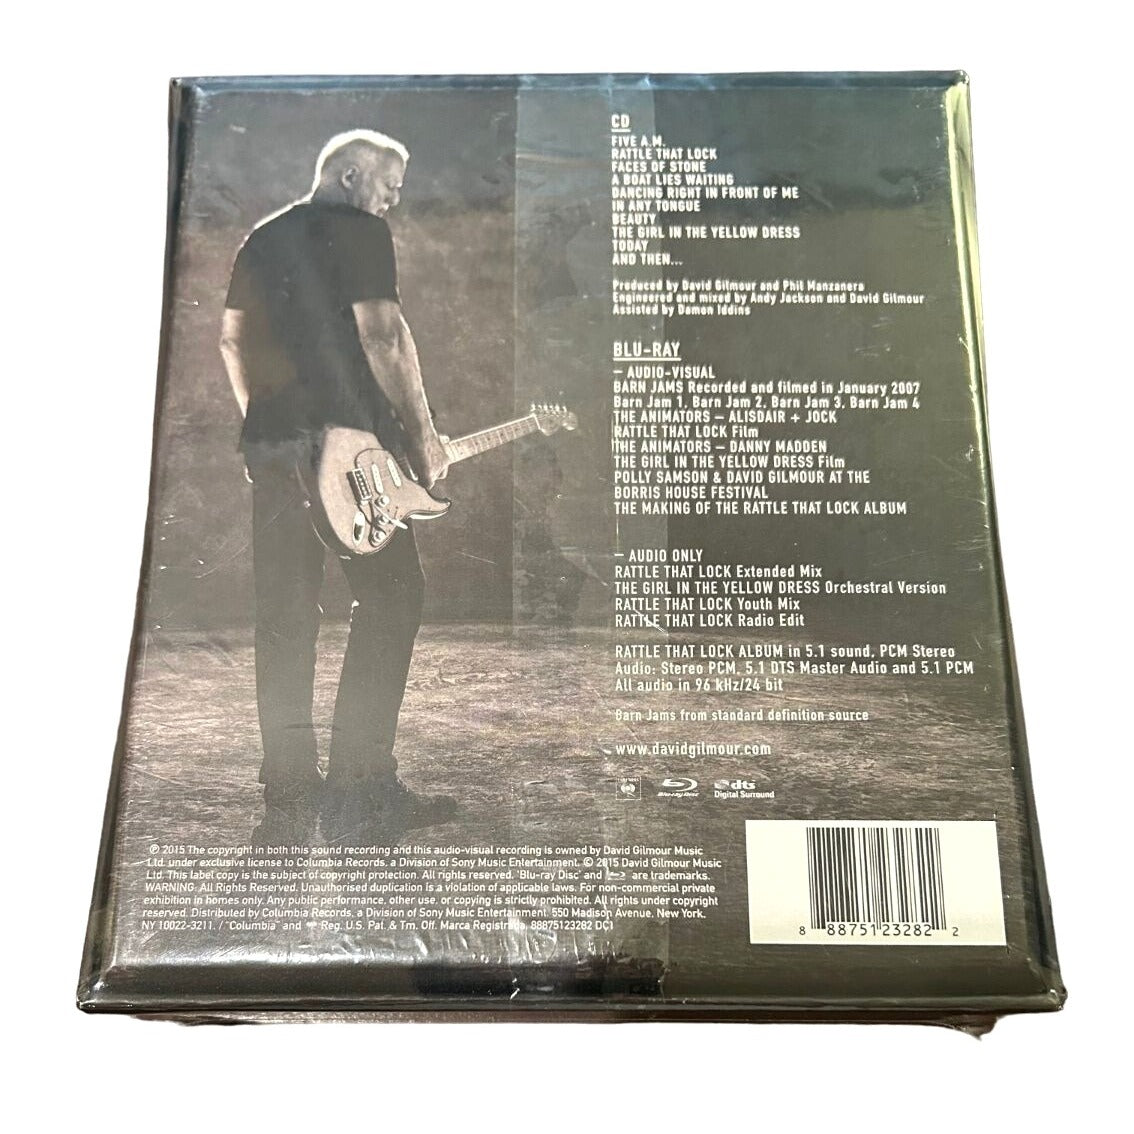 David Gilmour - Rattle That Lock (2015 Deluxe edition) CD plus BluRay Pink Floyd